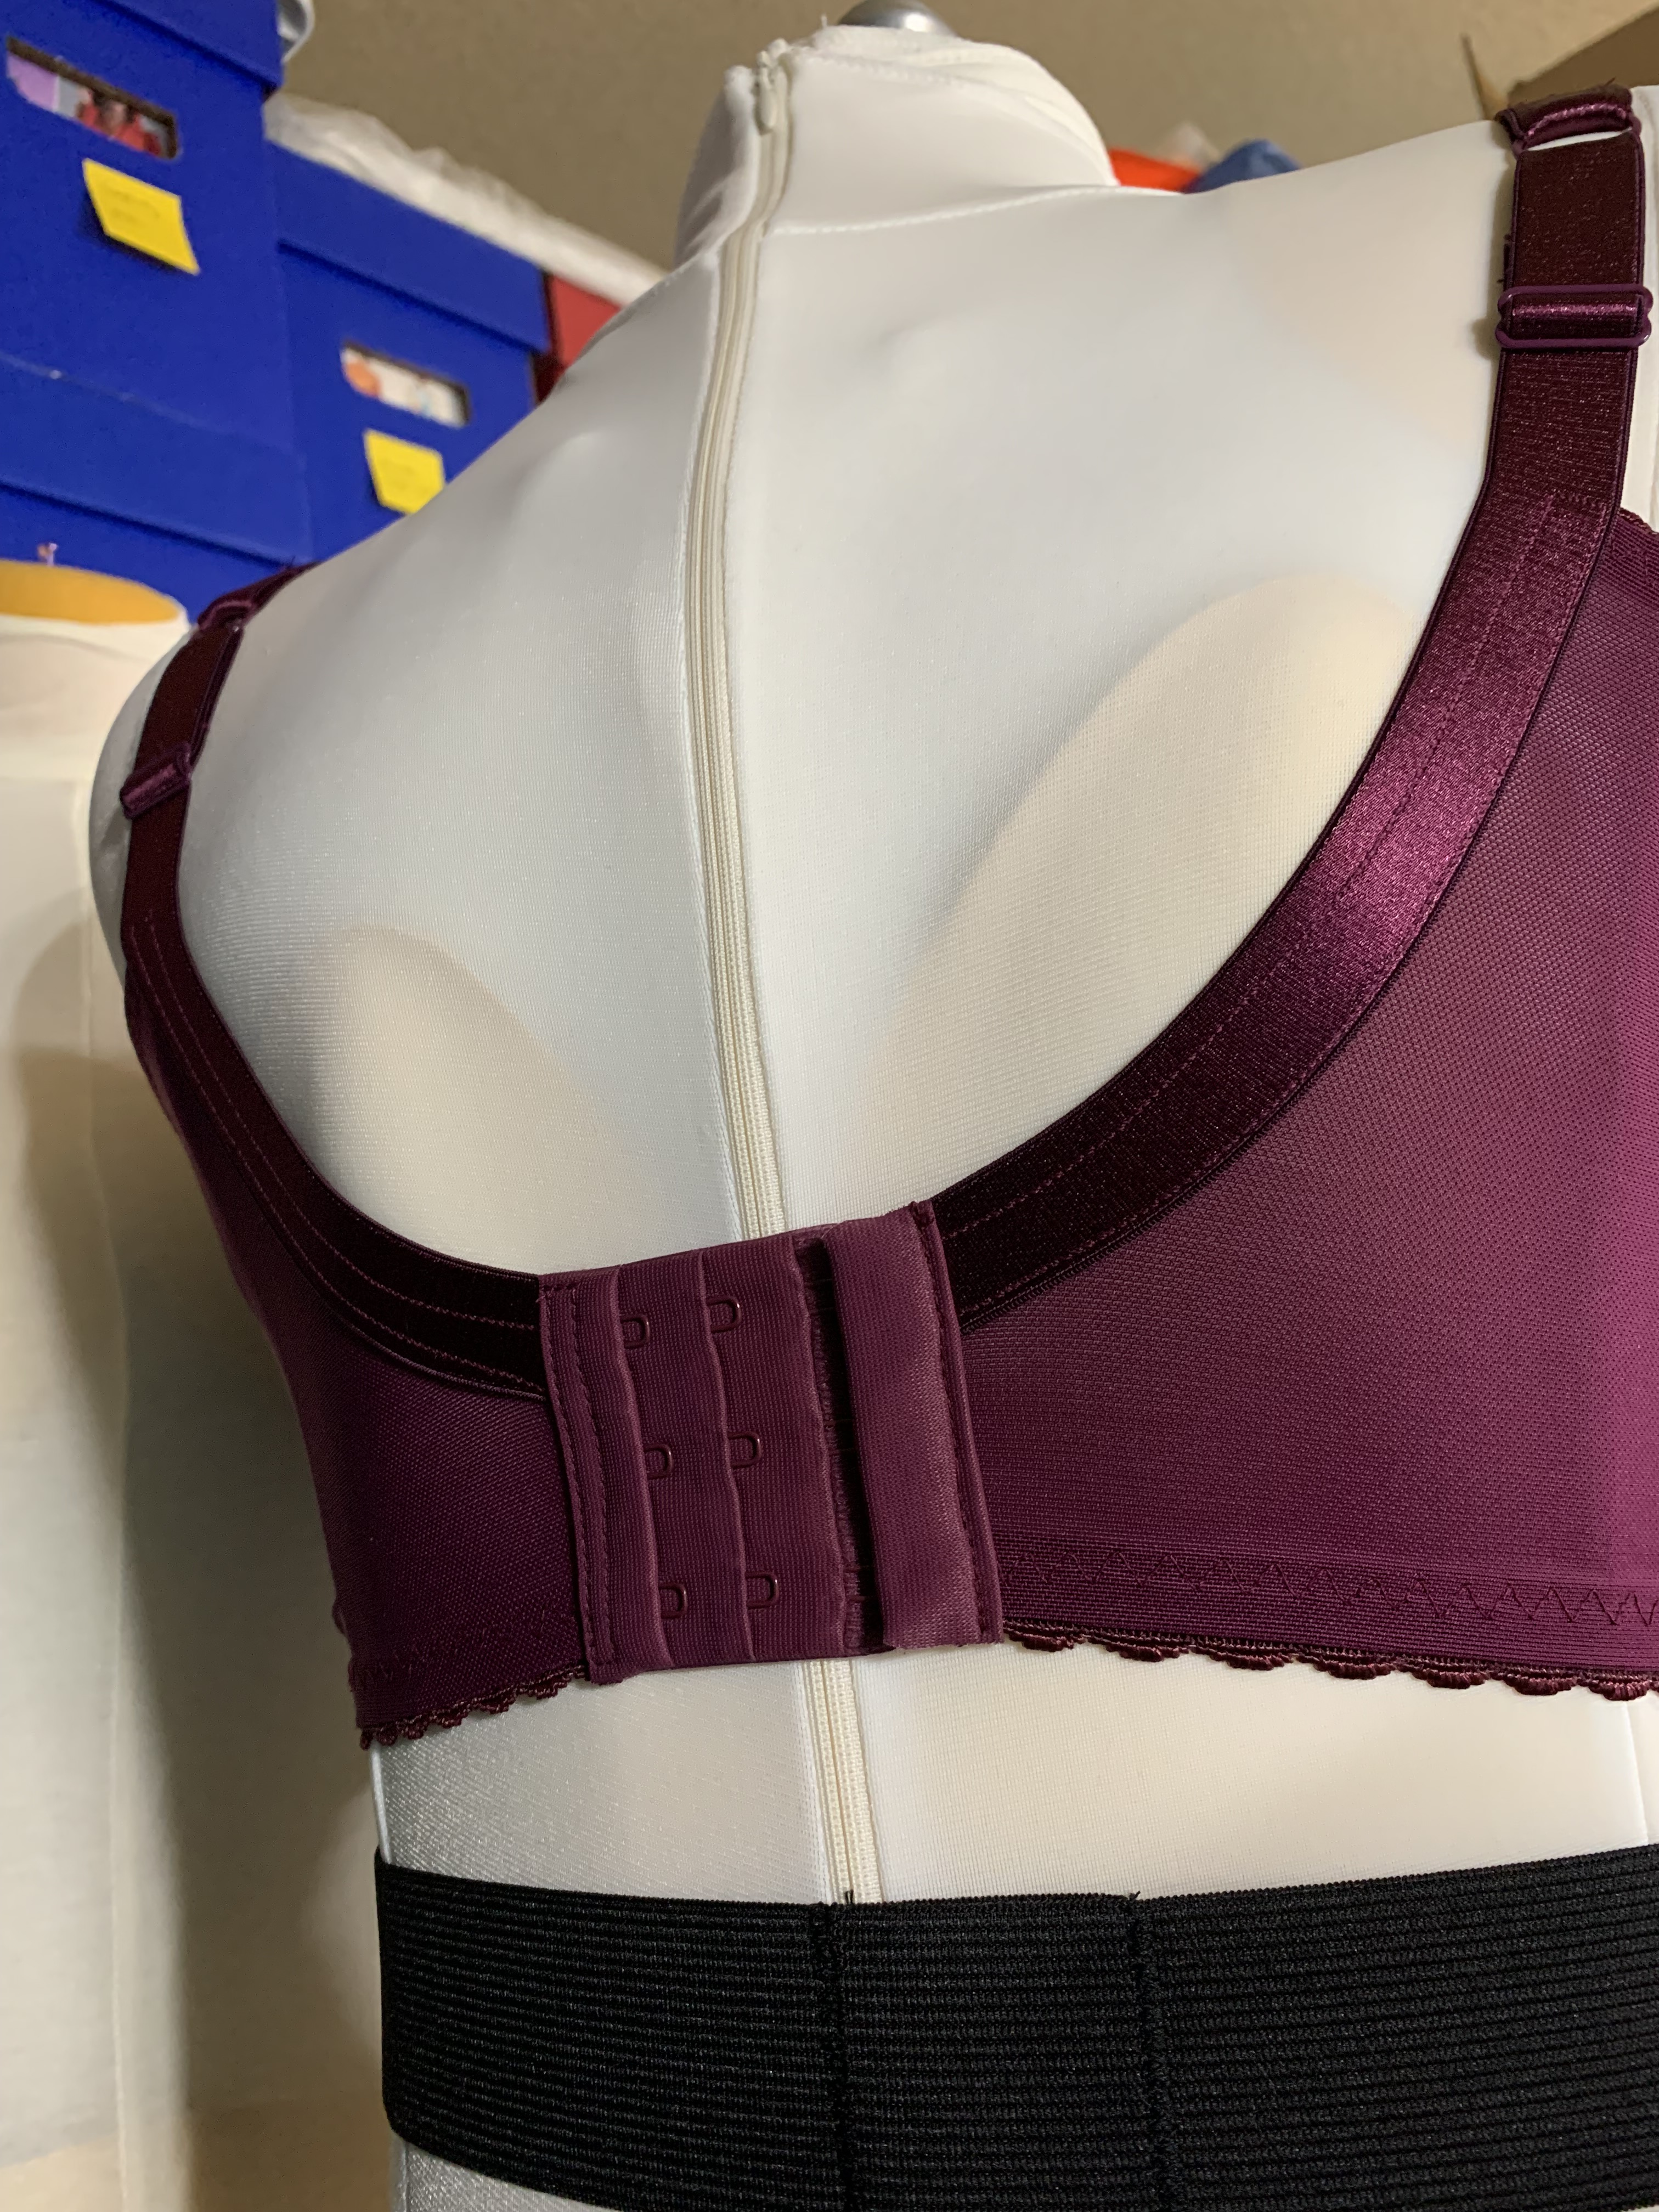 Craftsy Class Review of Sewing Bras: Designer Techniques